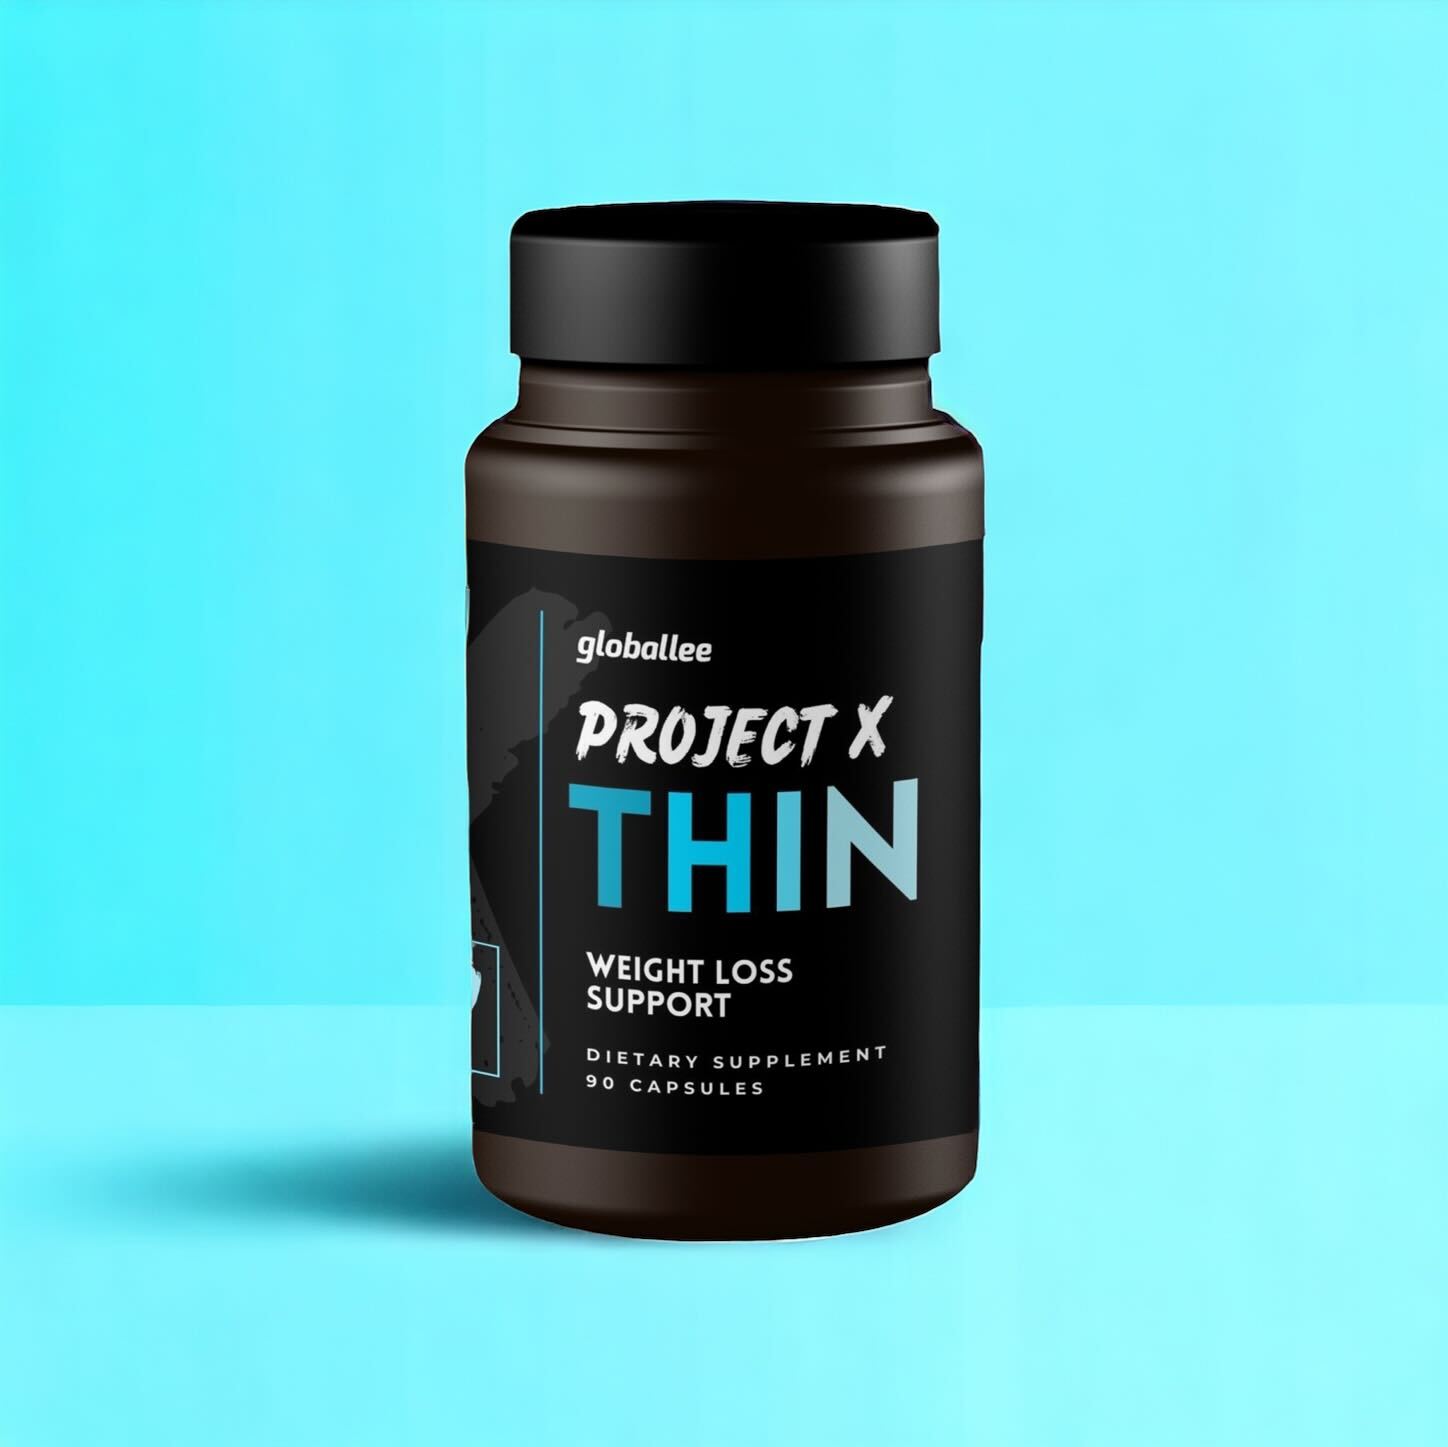 Project X Thin Slide 1